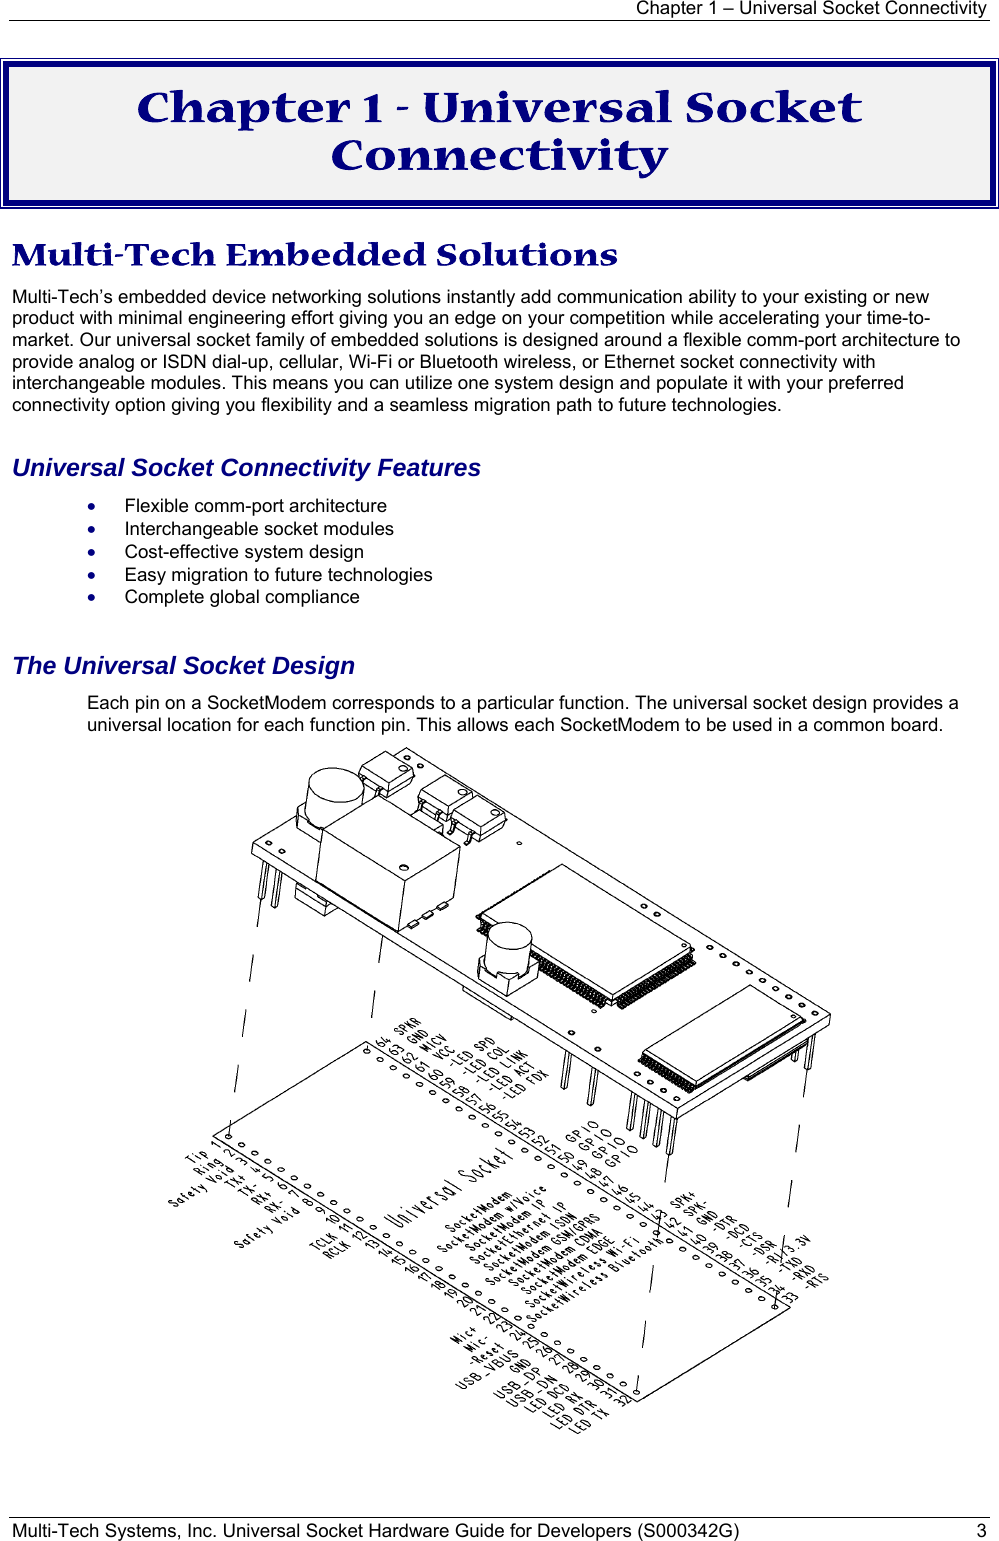 Chapter 1 – Universal Socket Connectivity Multi-Tech Systems, Inc. Universal Socket Hardware Guide for Developers (S000342G)  3  Chapter 1 - Universal Socket Connectivity  Multi-Tech Embedded Solutions Multi-Tech’s embedded device networking solutions instantly add communication ability to your existing or new product with minimal engineering effort giving you an edge on your competition while accelerating your time-to-market. Our universal socket family of embedded solutions is designed around a flexible comm-port architecture to provide analog or ISDN dial-up, cellular, Wi-Fi or Bluetooth wireless, or Ethernet socket connectivity with interchangeable modules. This means you can utilize one system design and populate it with your preferred connectivity option giving you flexibility and a seamless migration path to future technologies.  Universal Socket Connectivity Features • Flexible comm-port architecture  • Interchangeable socket modules • Cost-effective system design • Easy migration to future technologies • Complete global compliance  The Universal Socket Design  Each pin on a SocketModem corresponds to a particular function. The universal socket design provides a universal location for each function pin. This allows each SocketModem to be used in a common board.  